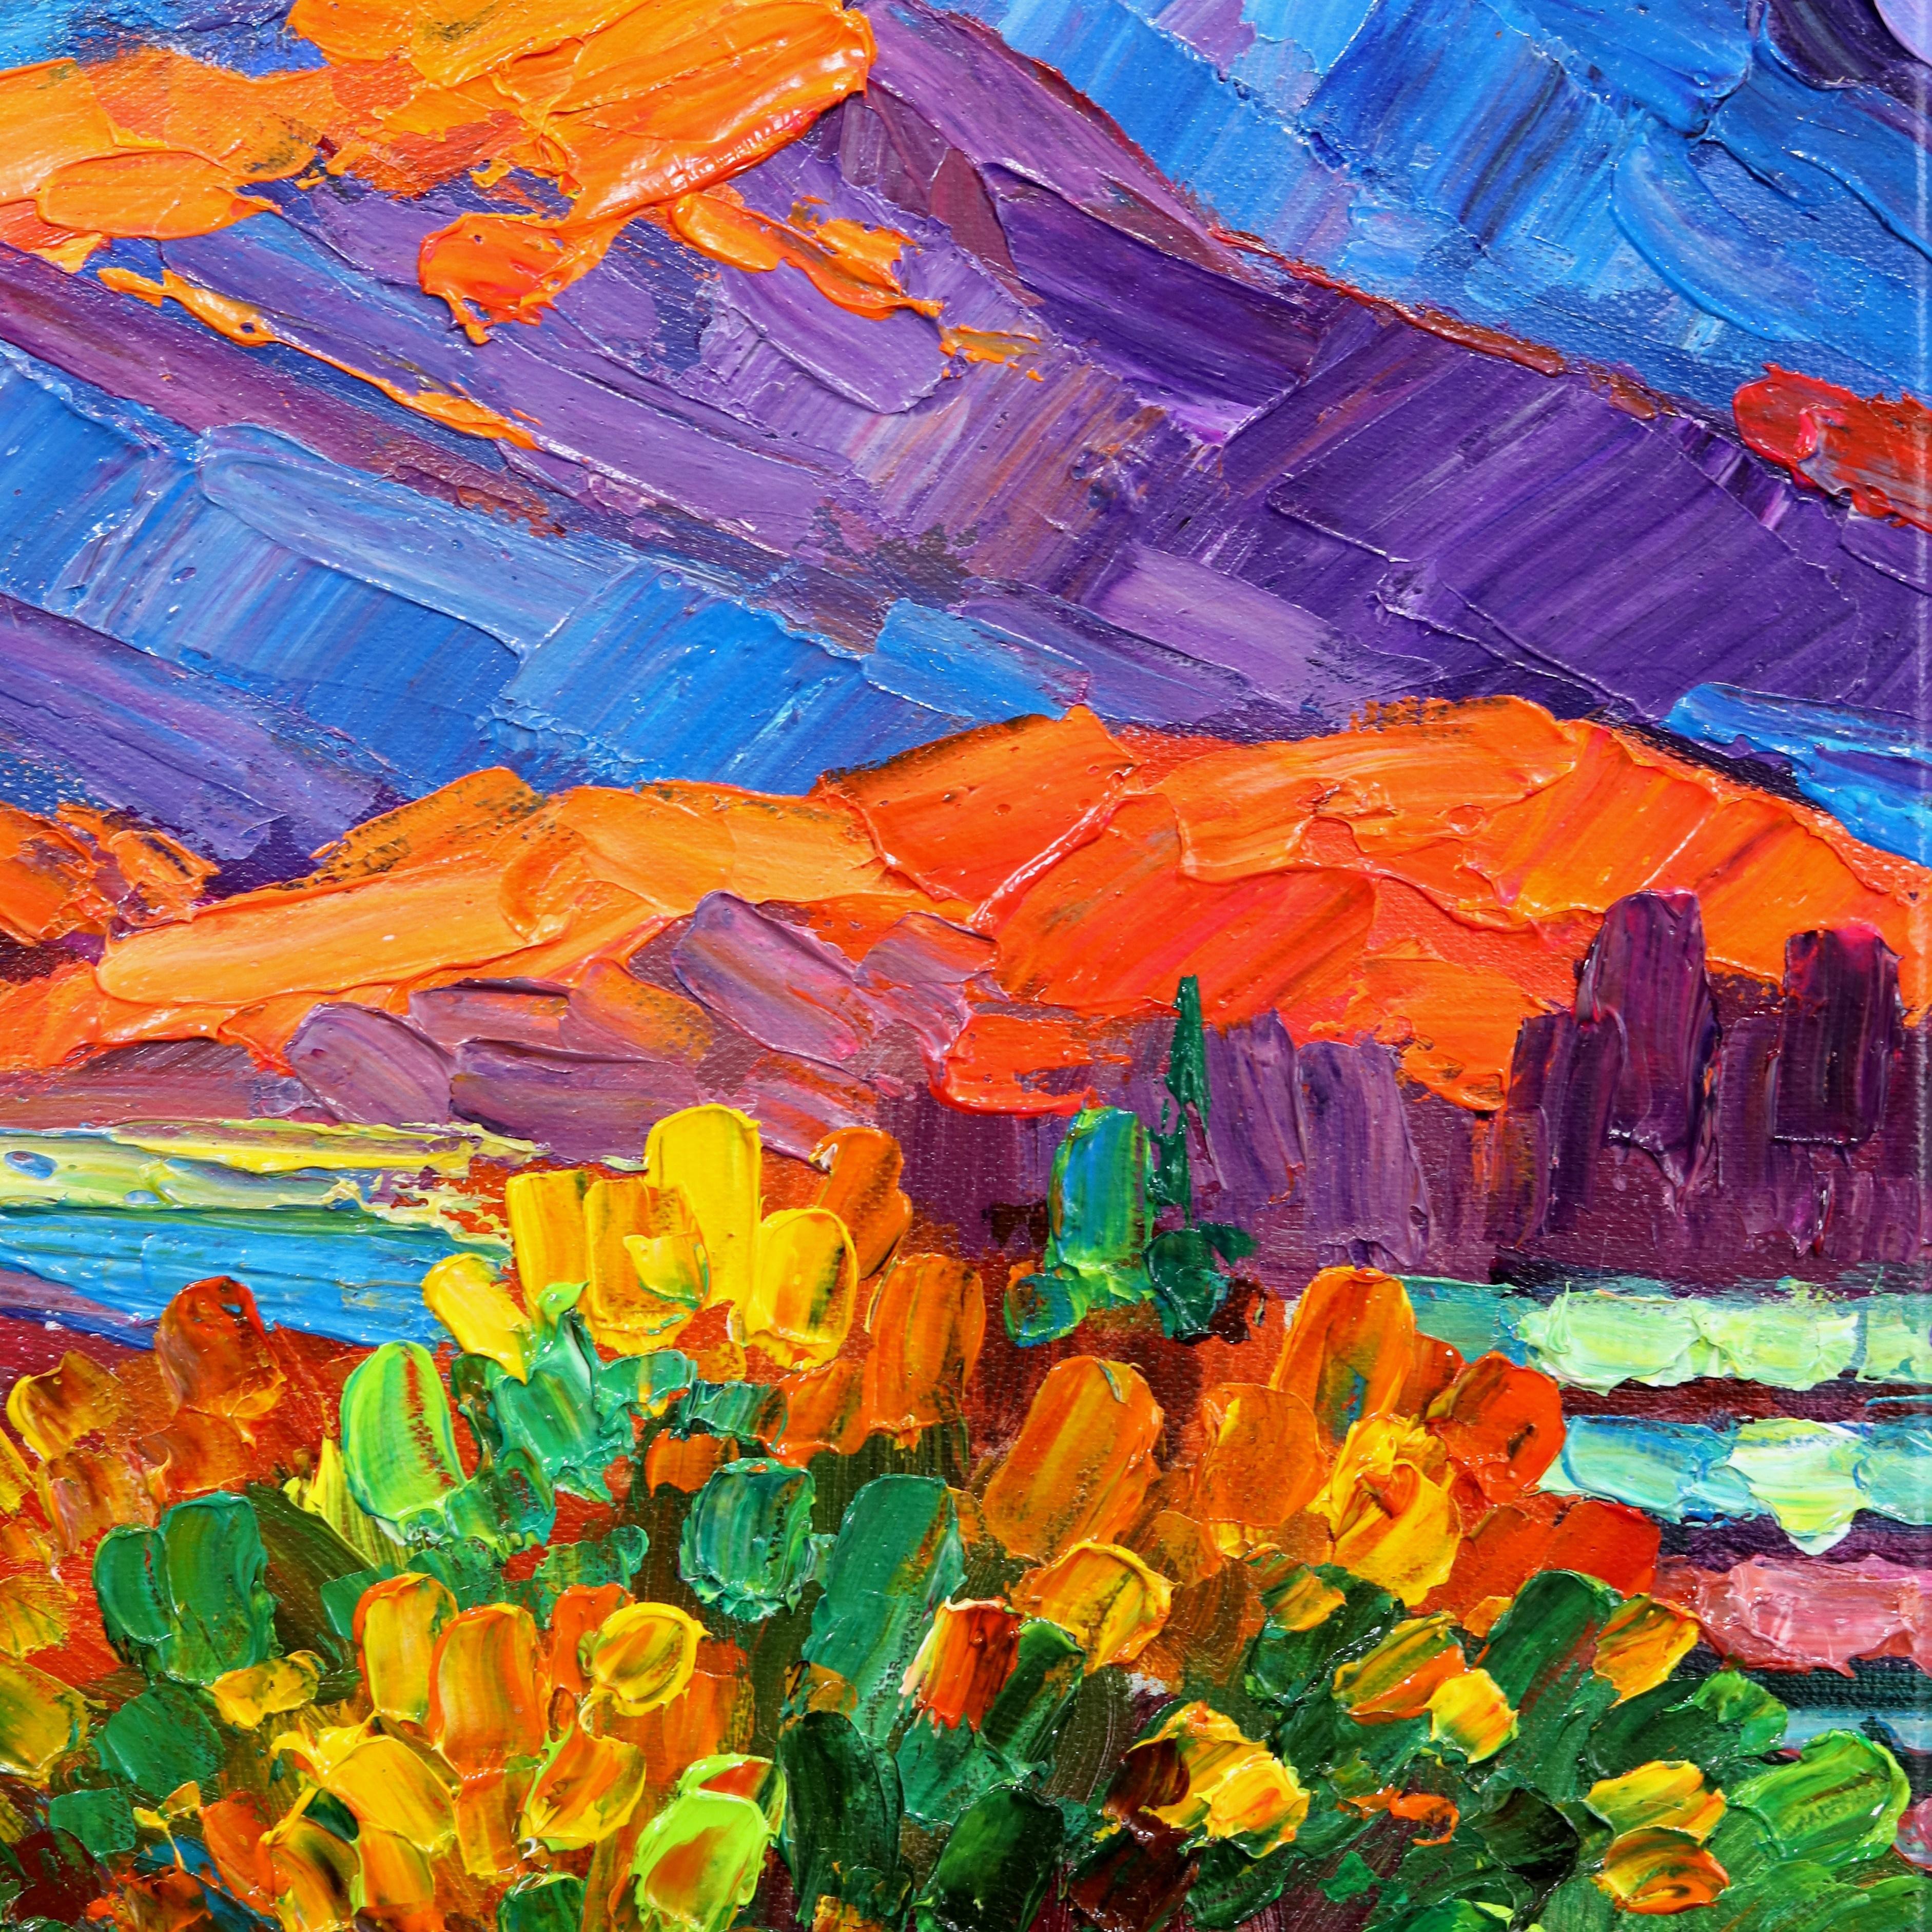 A Spark in the Sky - Vibrant Textural Mountain Desert Landscape Oil Painting 4